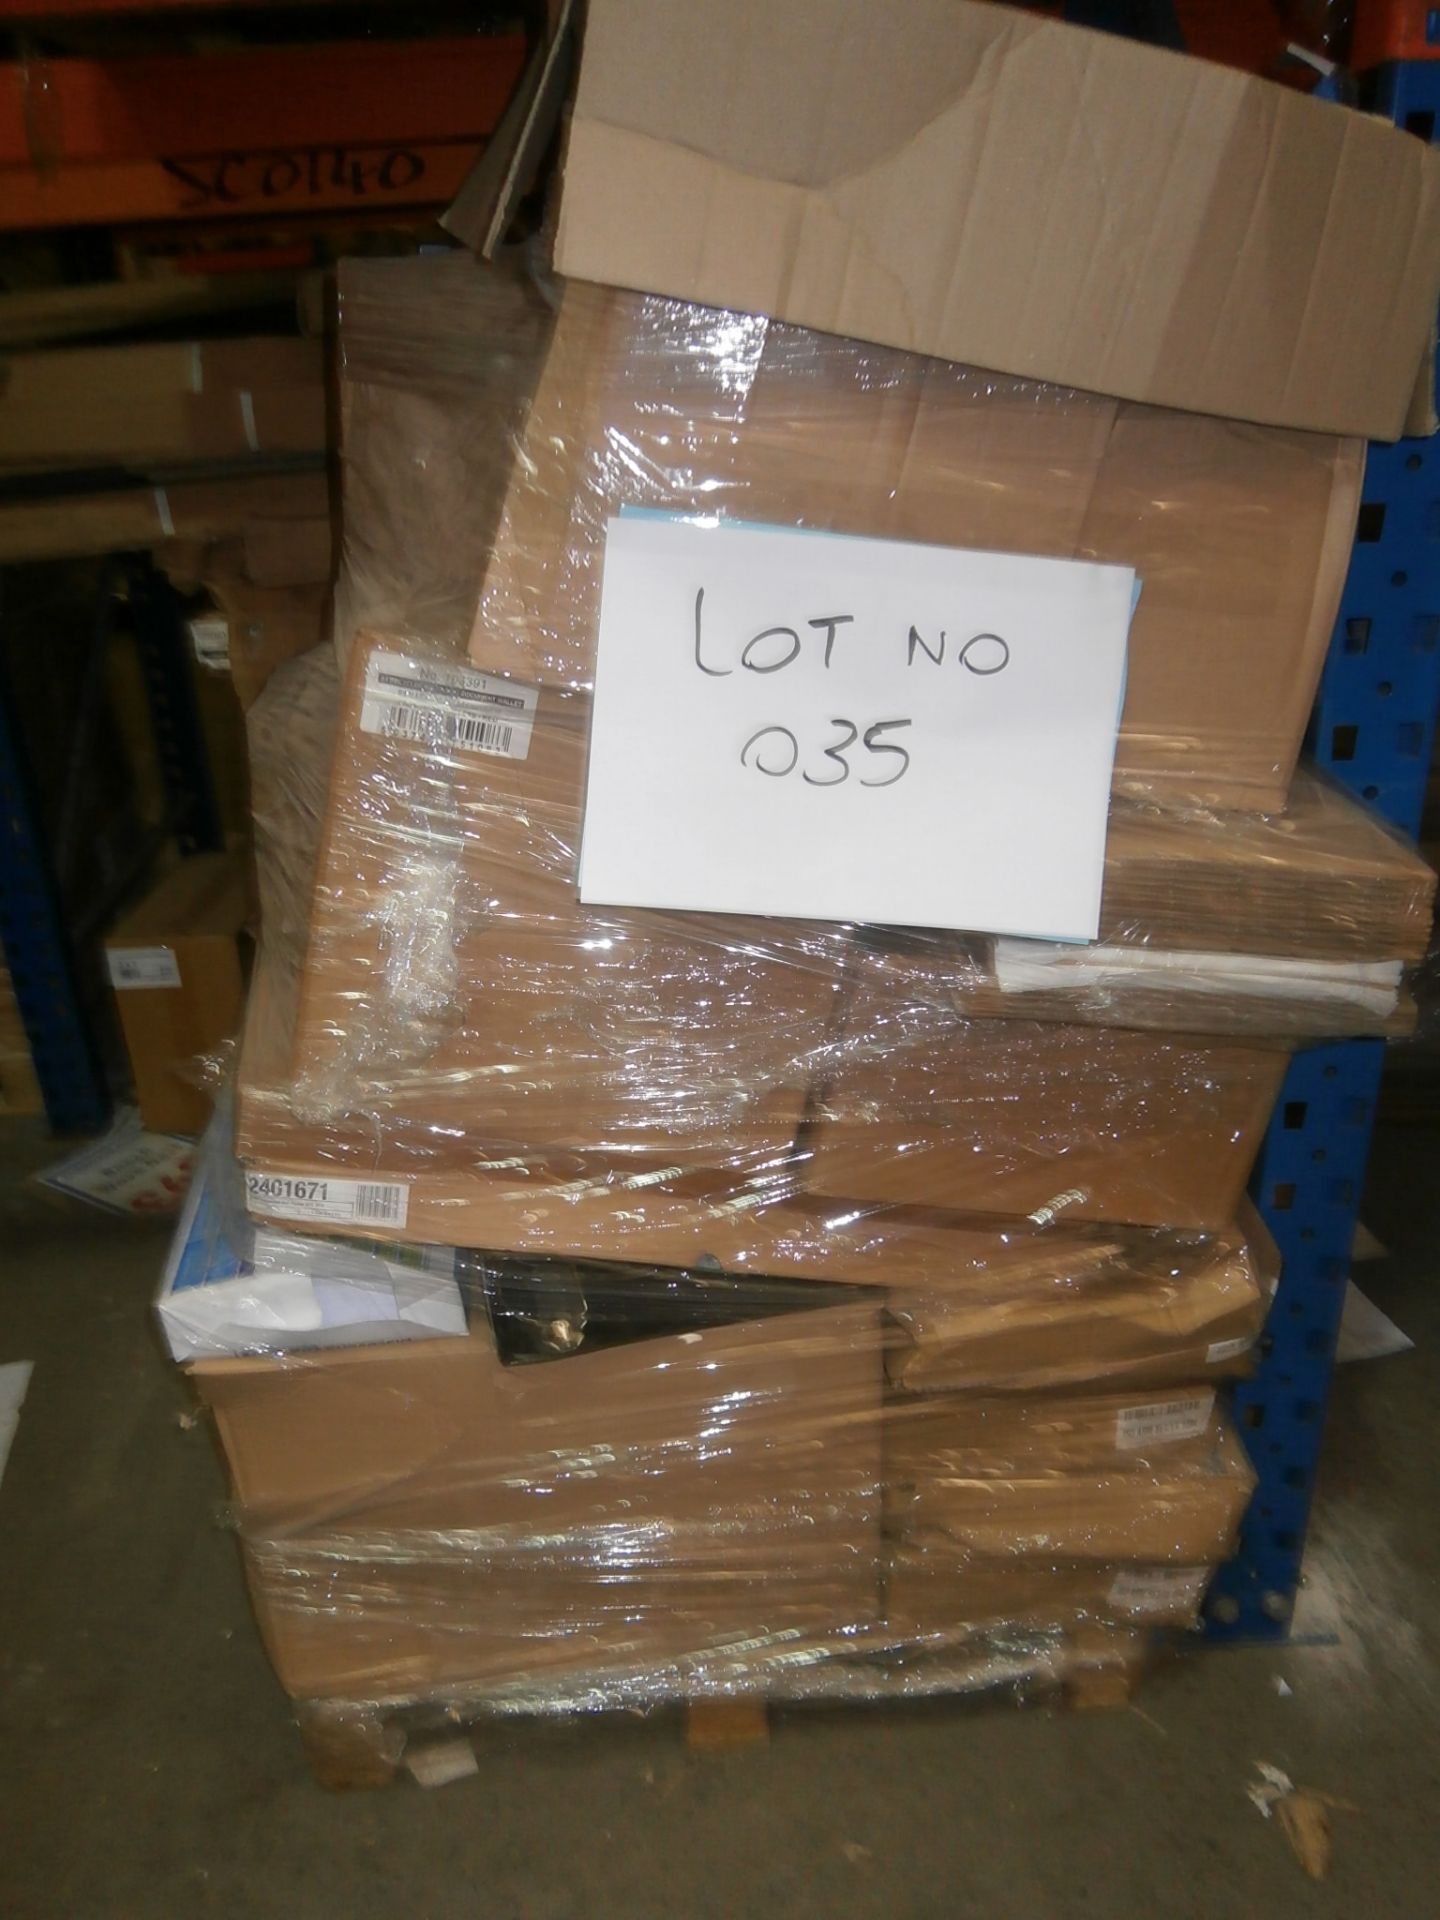 1 x Pallet of Mixed Stationary Including Remarkable Products, 3M Products, Report Covers, Elba